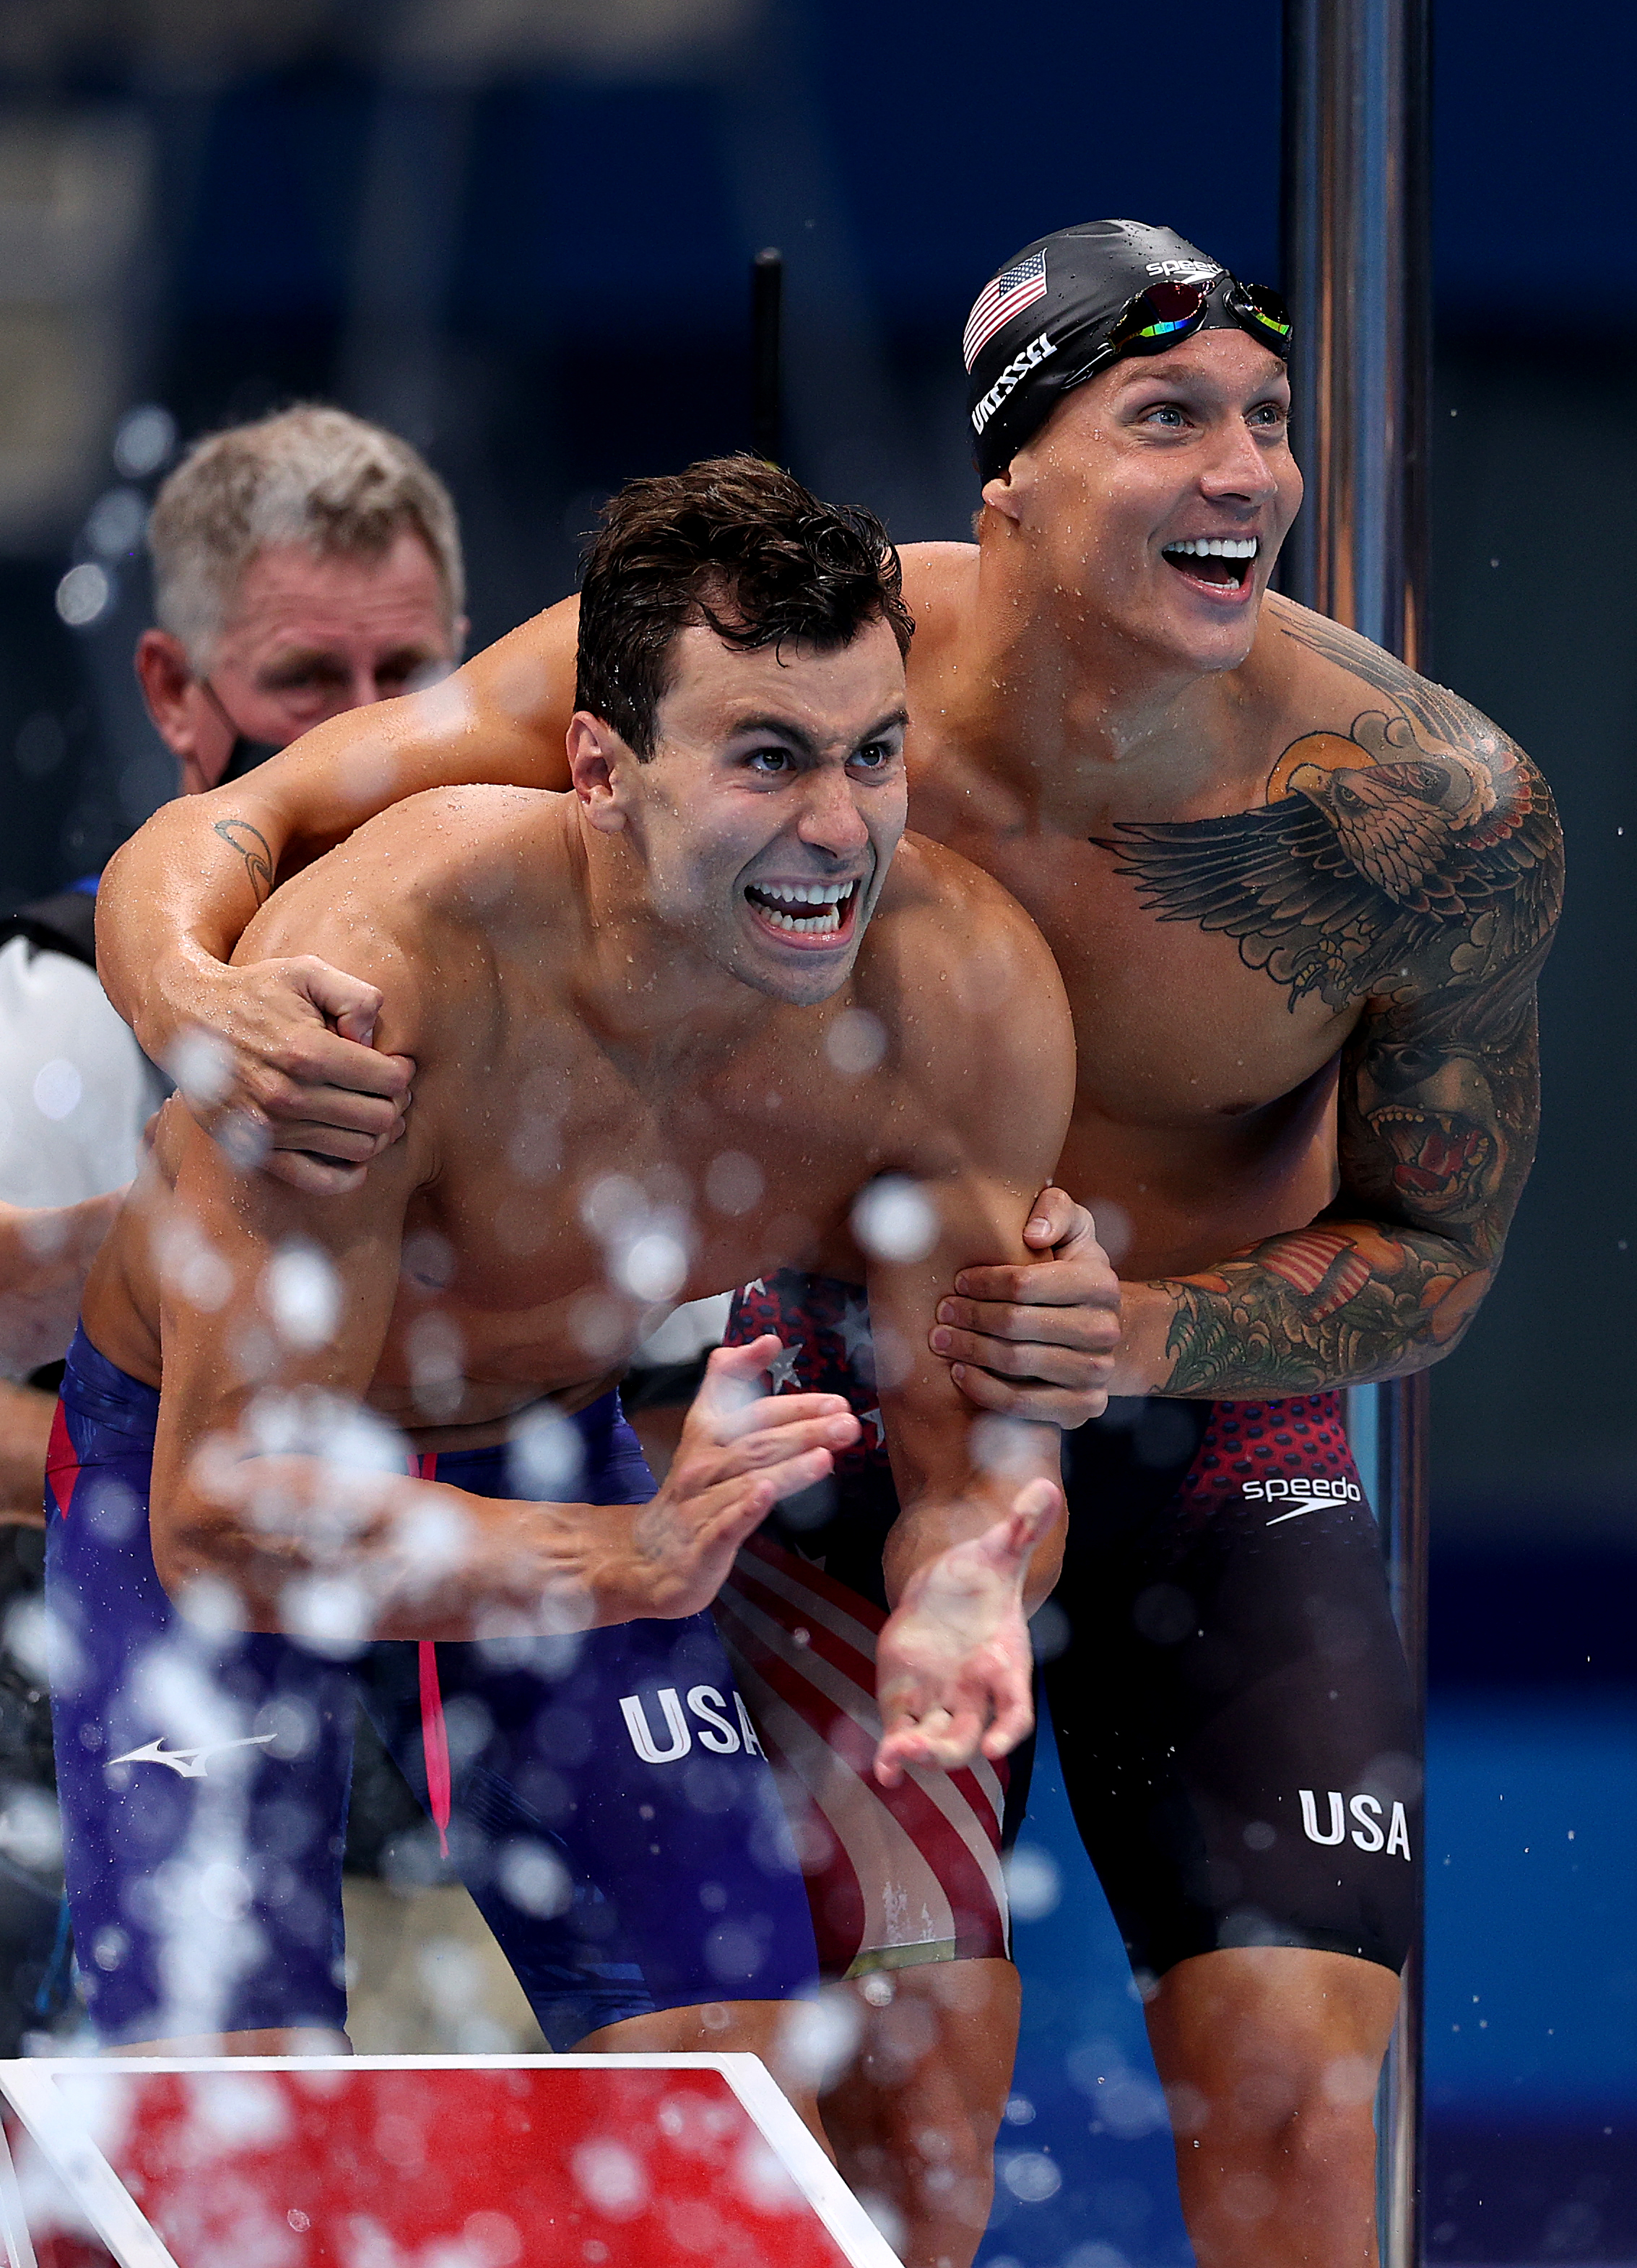 Blake Pieroni of Team United States and Caeleb Dressel of Team United States celebrate after winning the gold medal in the Men’s 4 x 100m Freestyle Relay Final on day three of the Tokyo 2020 Olympic Games at Tokyo Aquatics Centre on July 26, 2021 in Tokyo, Japan.